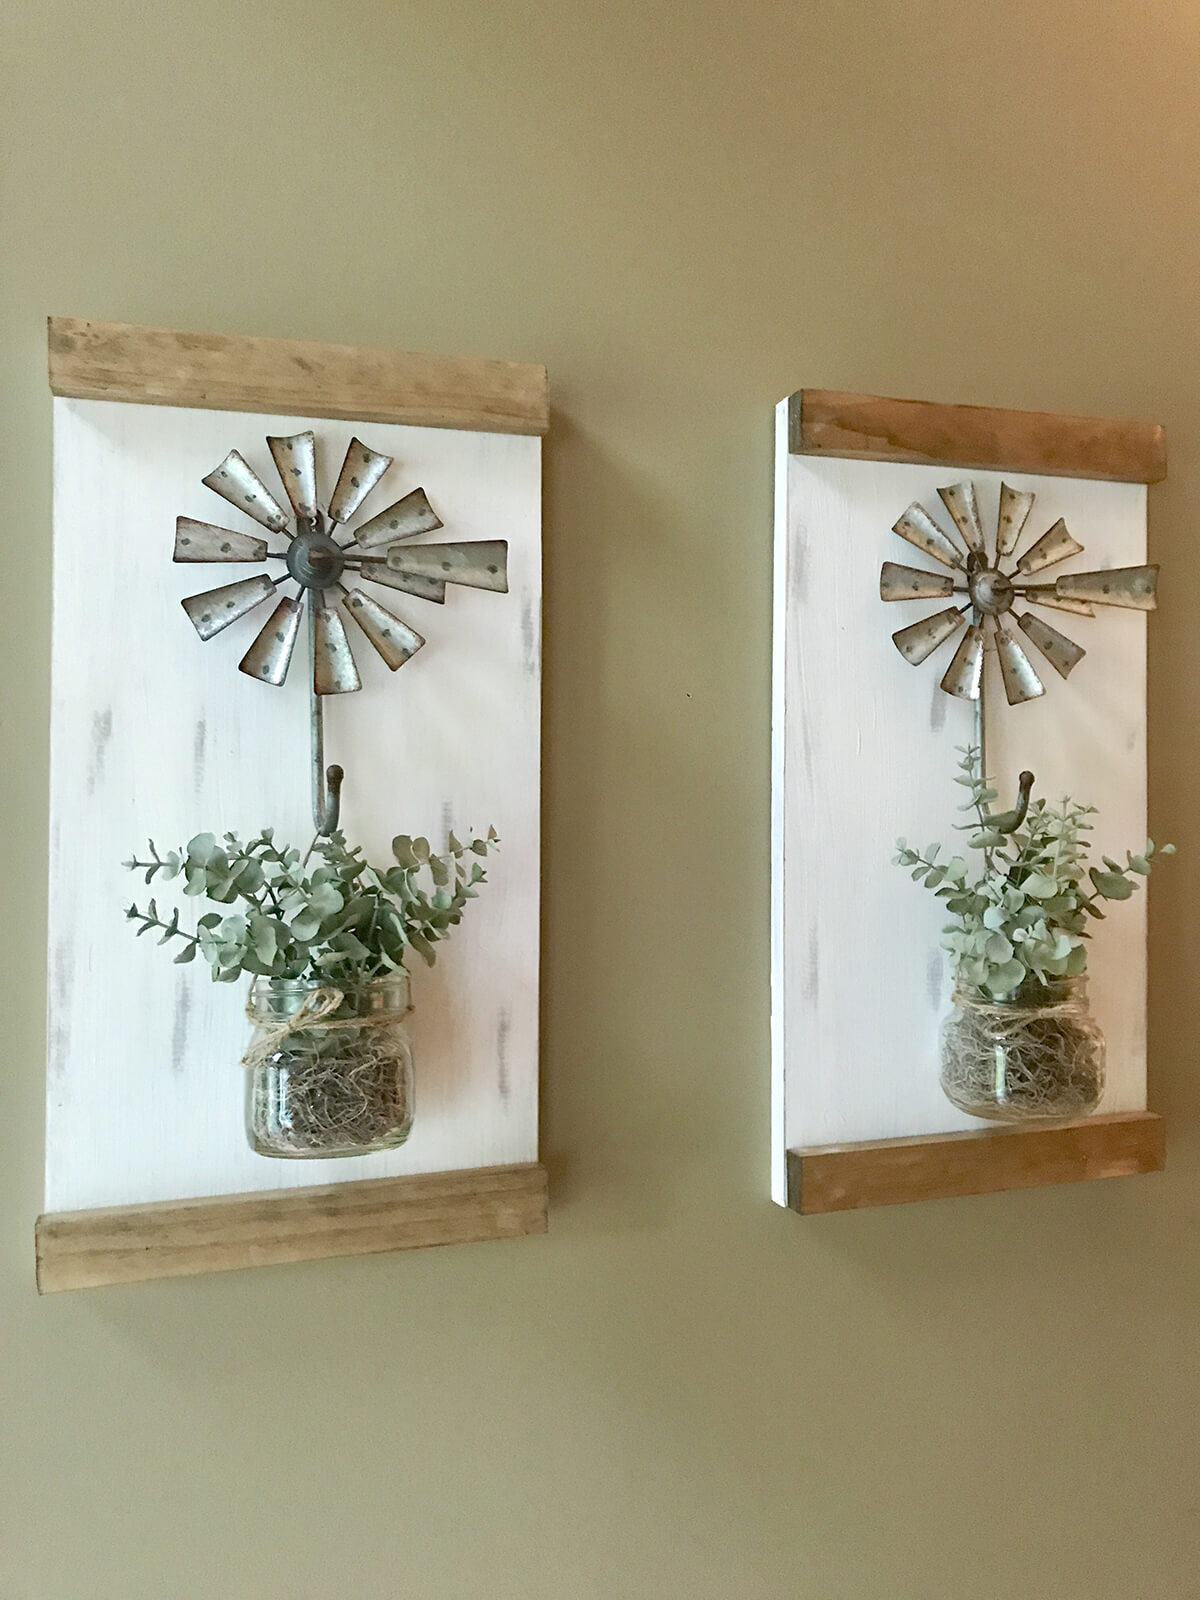 Homemade Windmill Planters for Artists and Designers